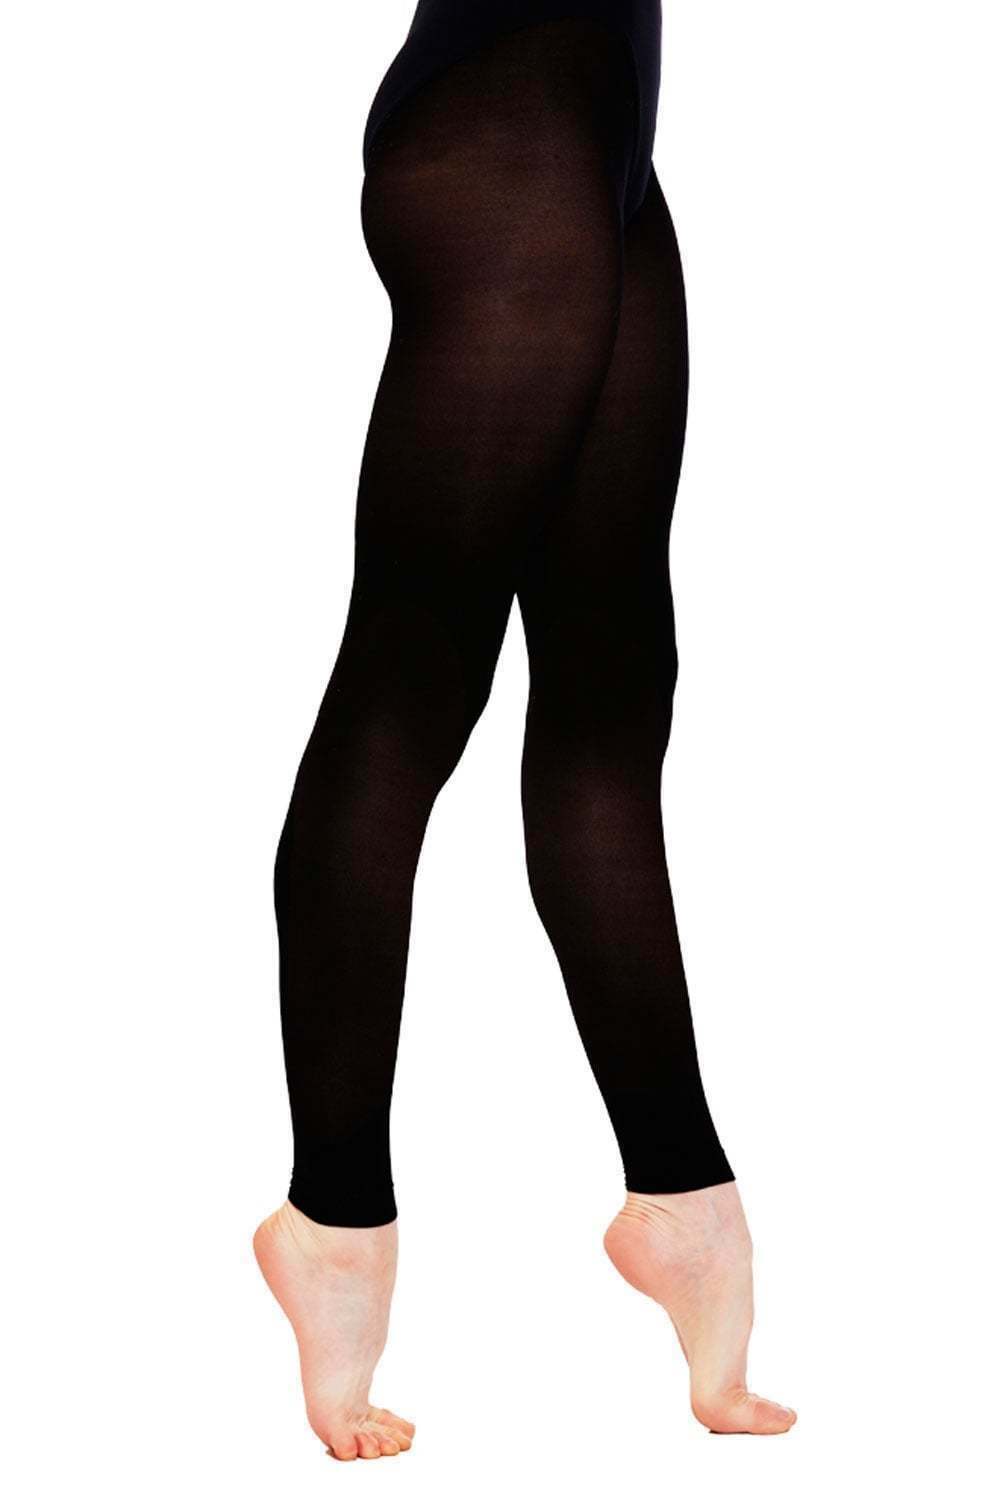 CHILDRENS GIRLS SILKY FOOTLESS DANCE TIGHTS IN BLACK